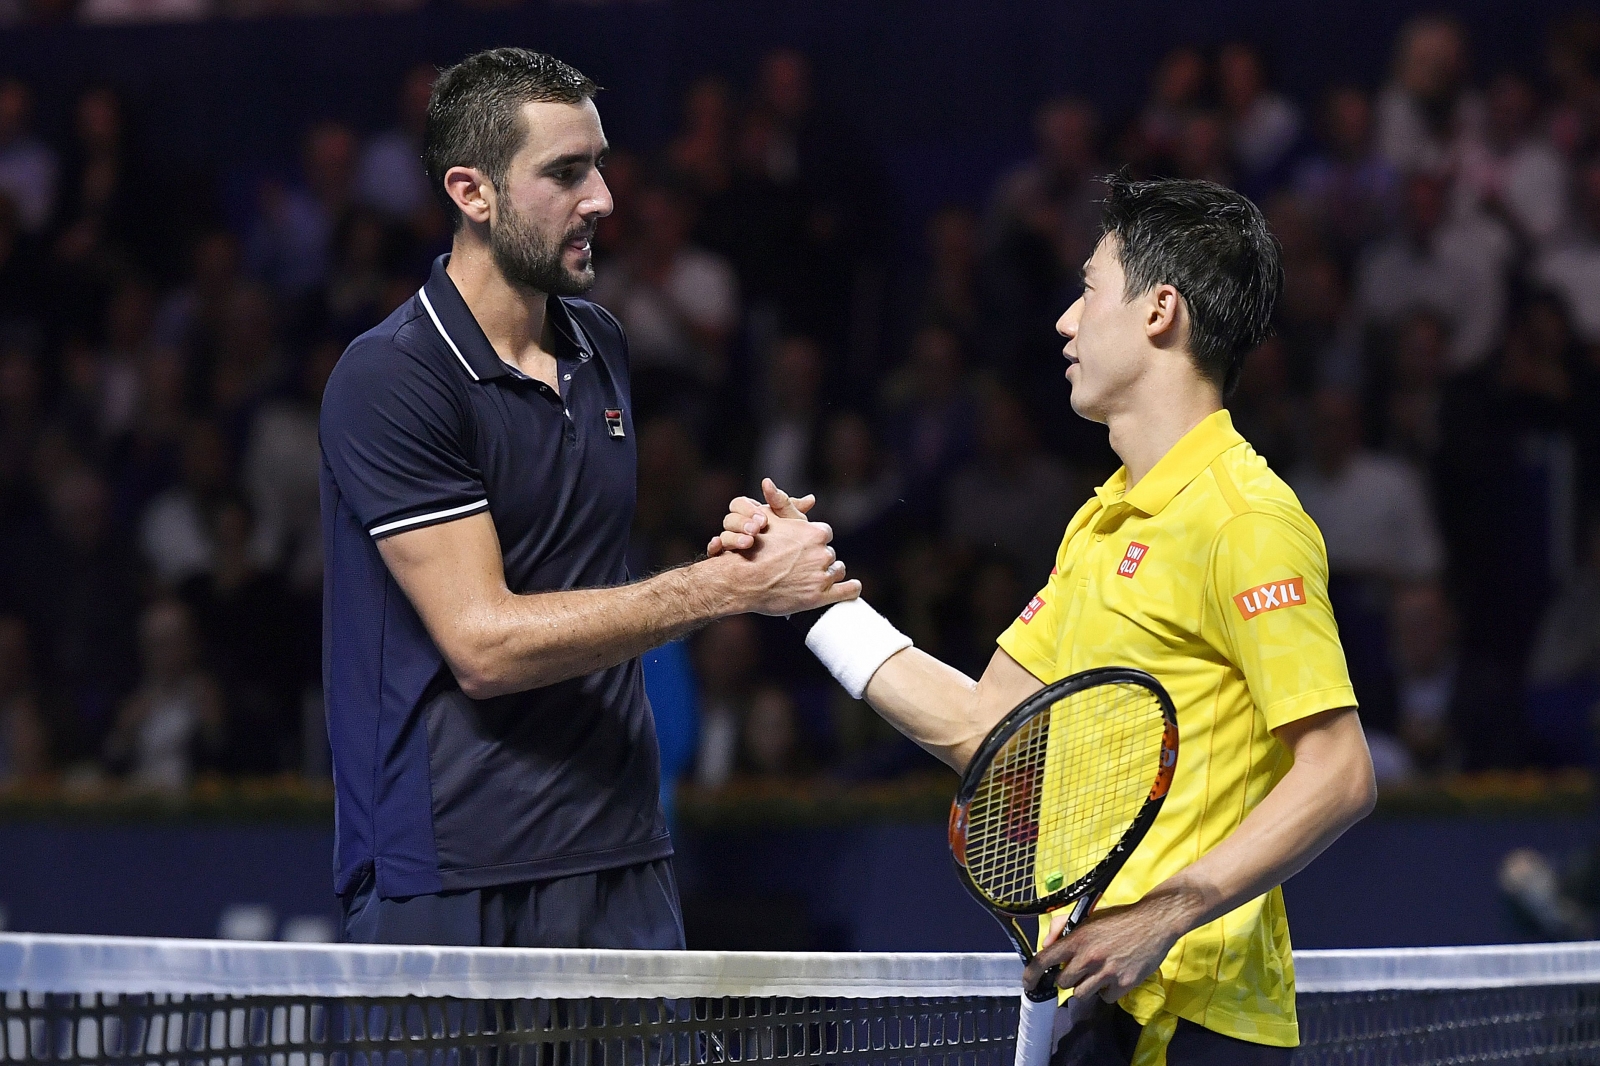 Kei Nishikori vs Marin Cilic, Barclays ATP World Tour Finals 2016 Where to watch live, preview and betting odds IBTimes UK